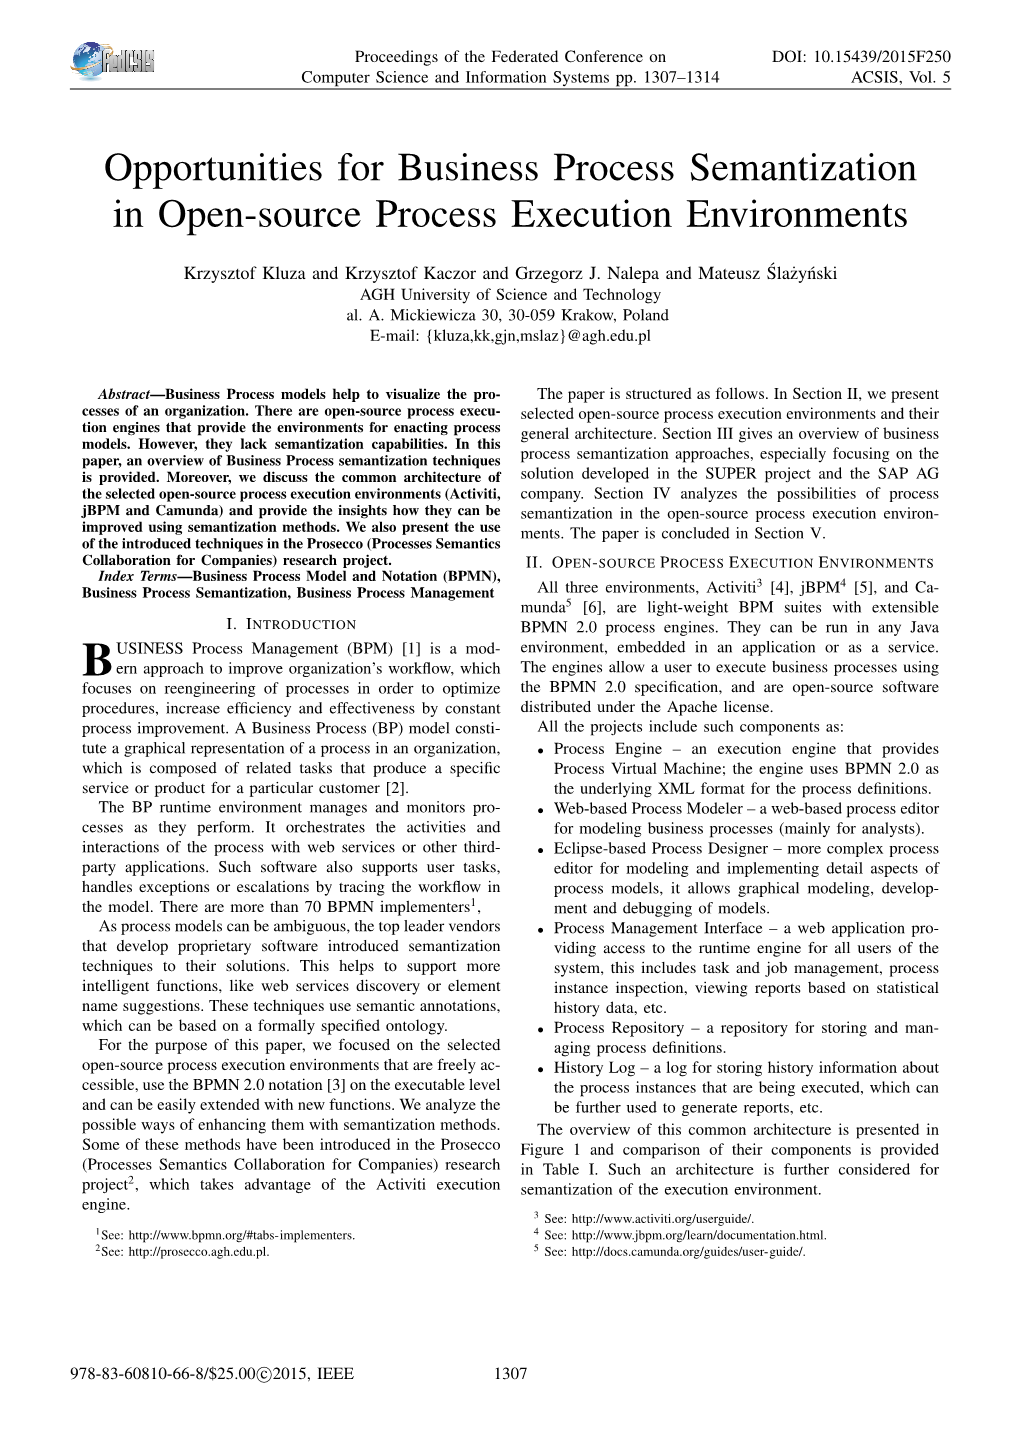 Opportunities for Business Process Semantization in Open-Source Process Execution Environments